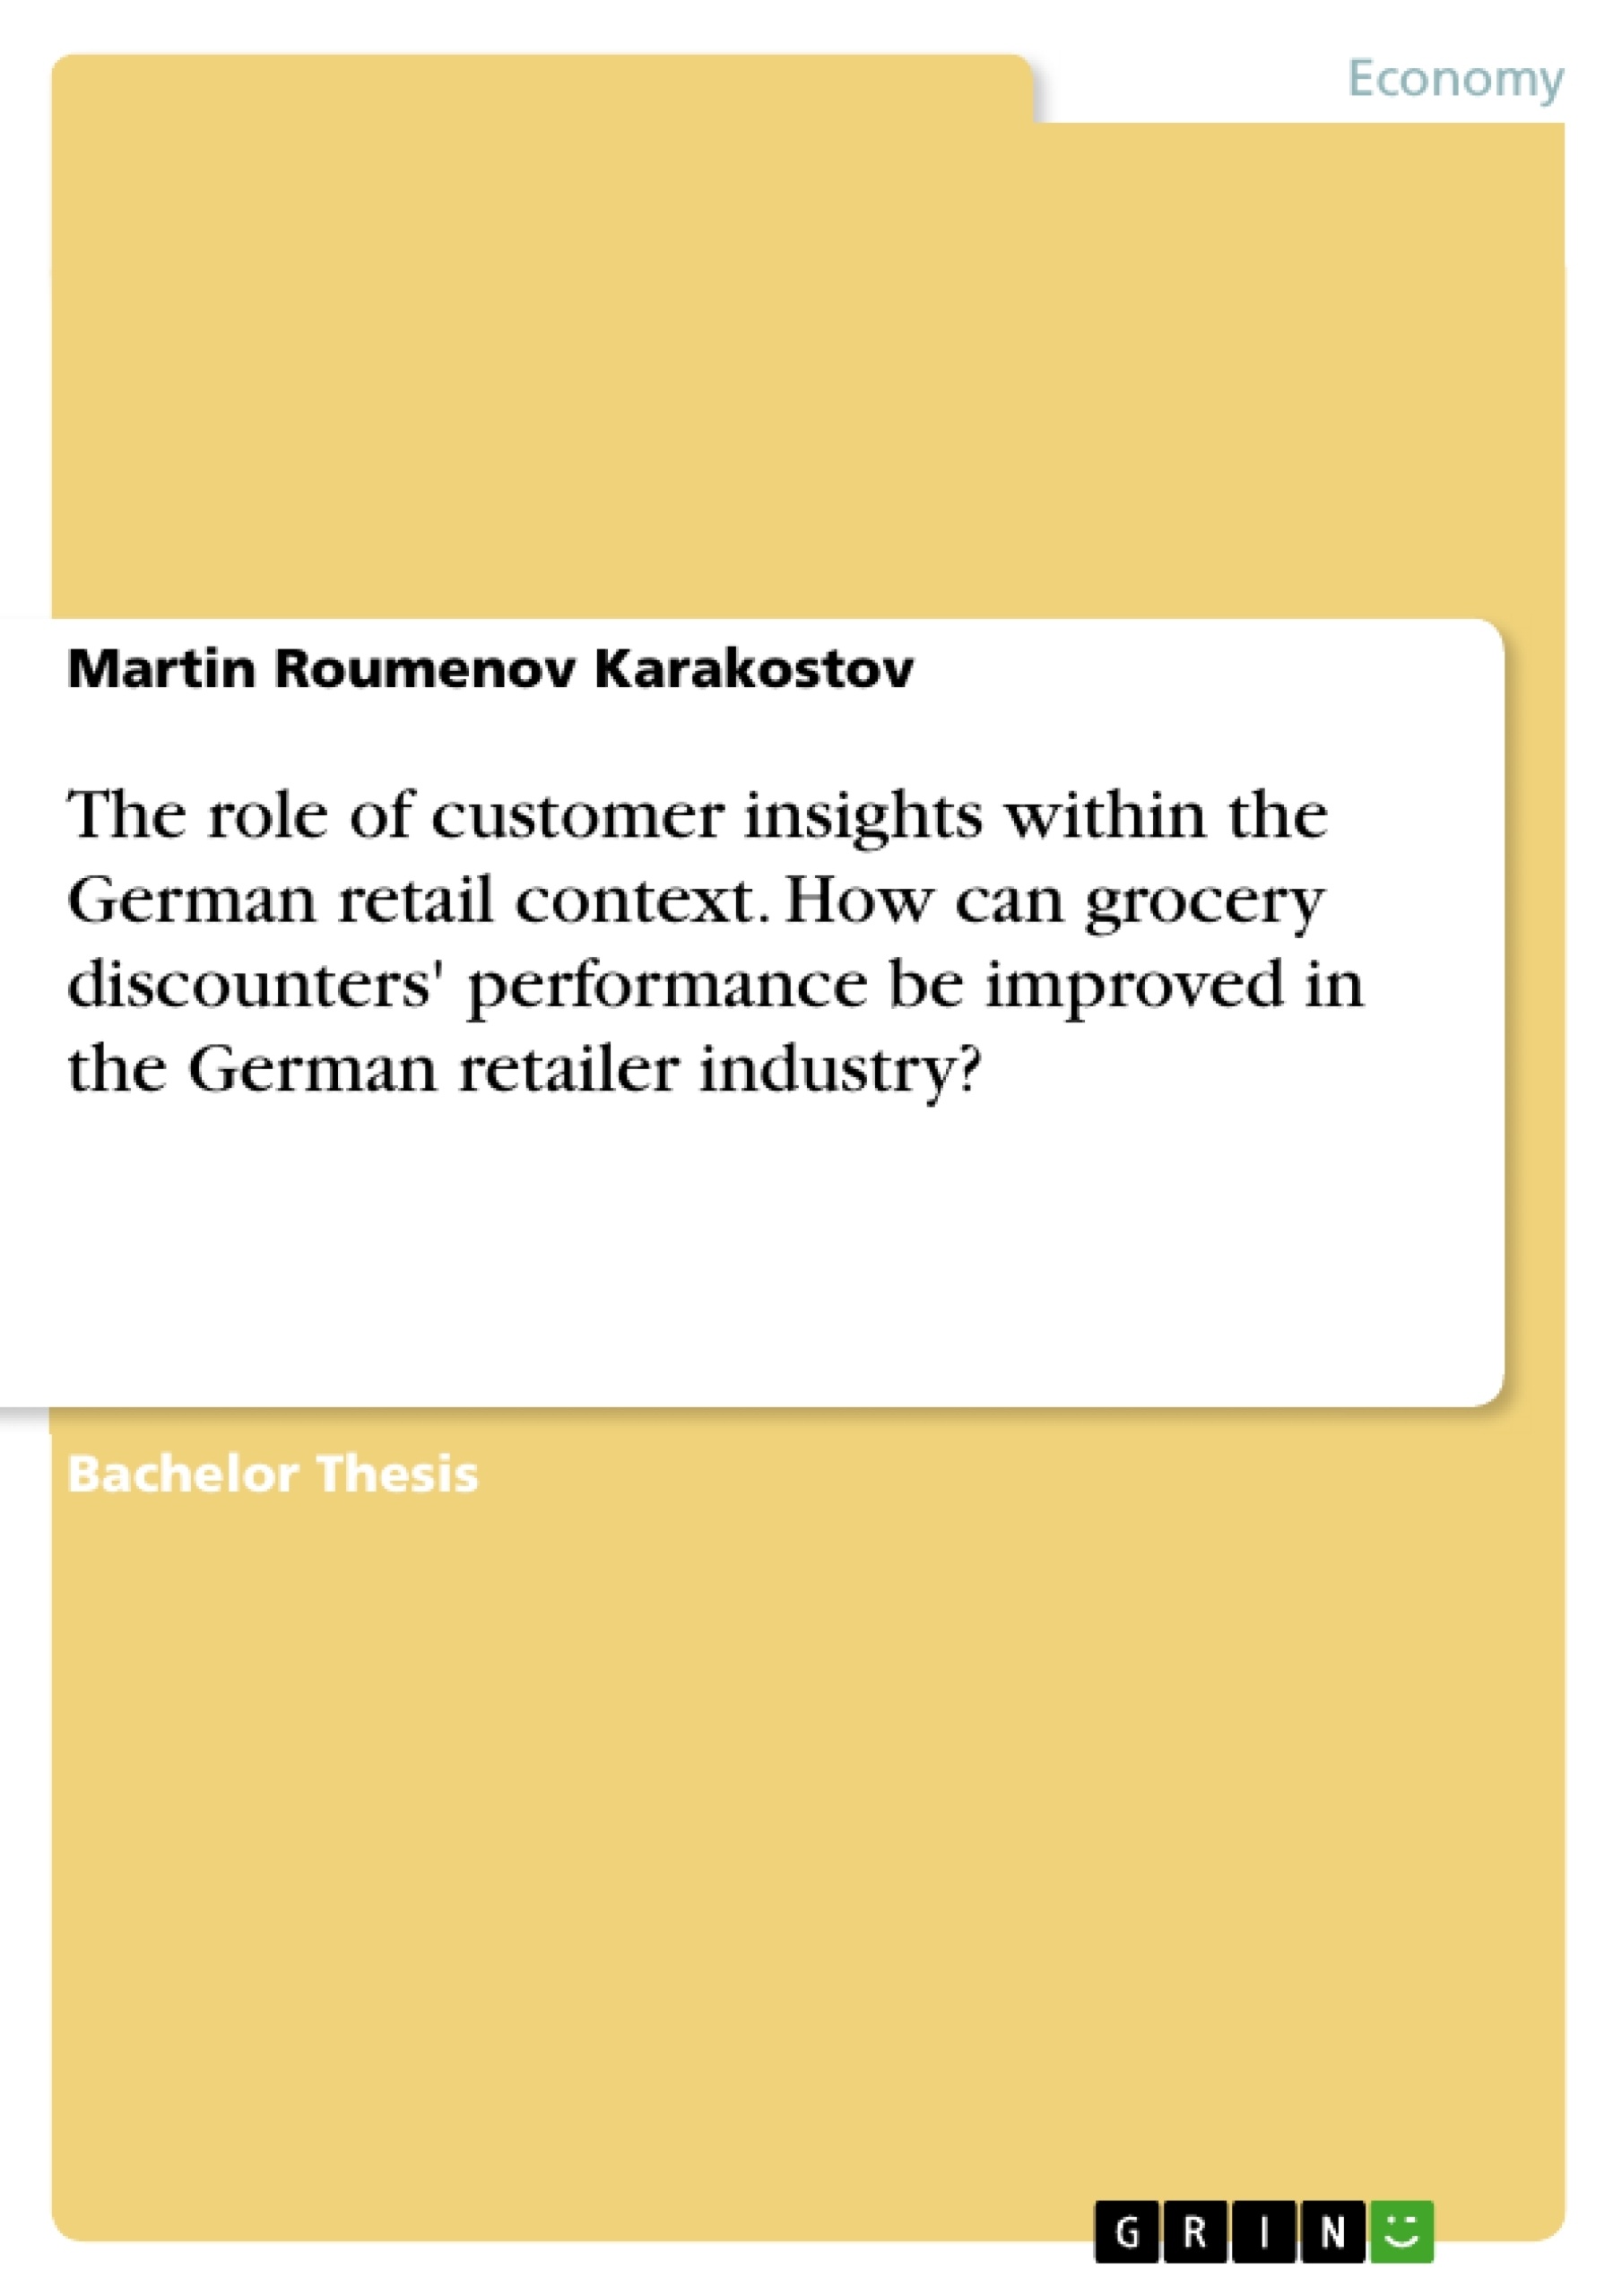 Titre: The role of customer insights within the German retail context. How can grocery discounters' performance be improved in the German retailer industry?